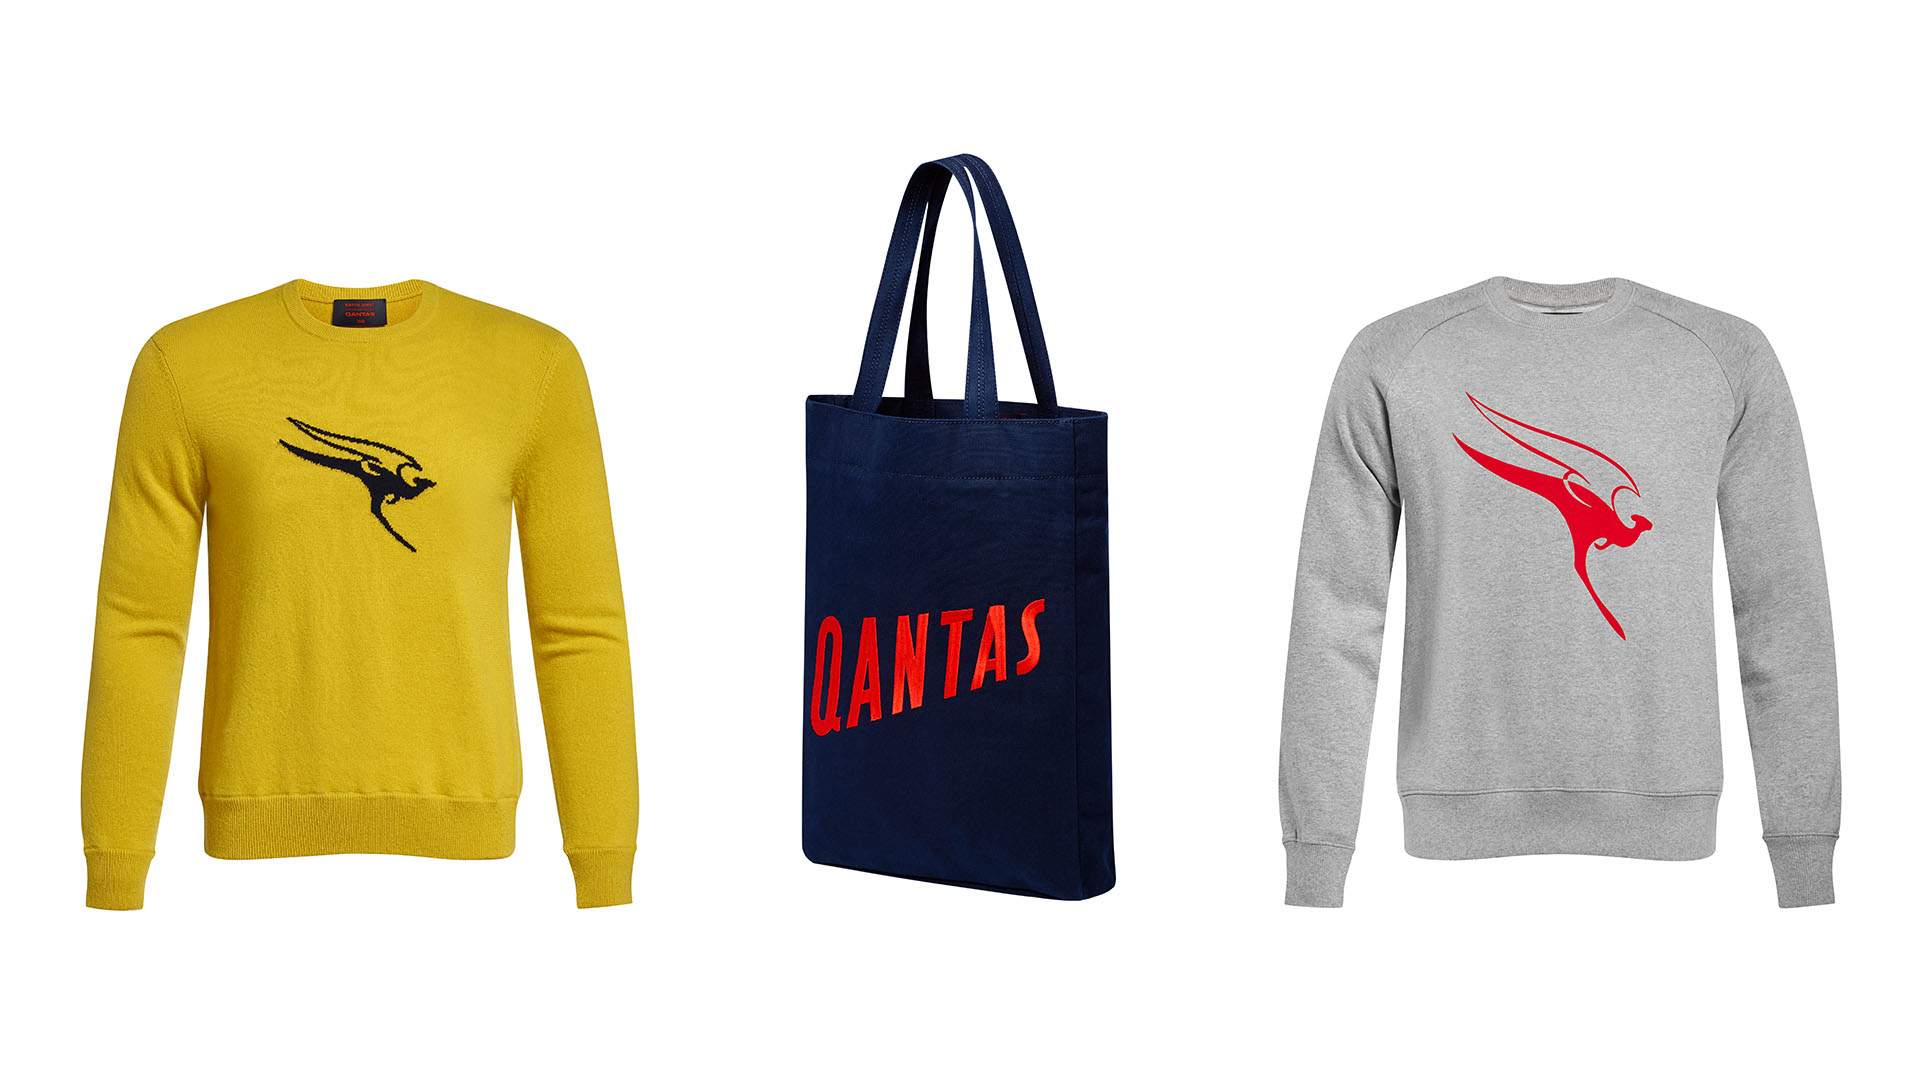 Qantas Is Now Selling Retro Athleisure Wear to Help You Pretend You're On Holidays